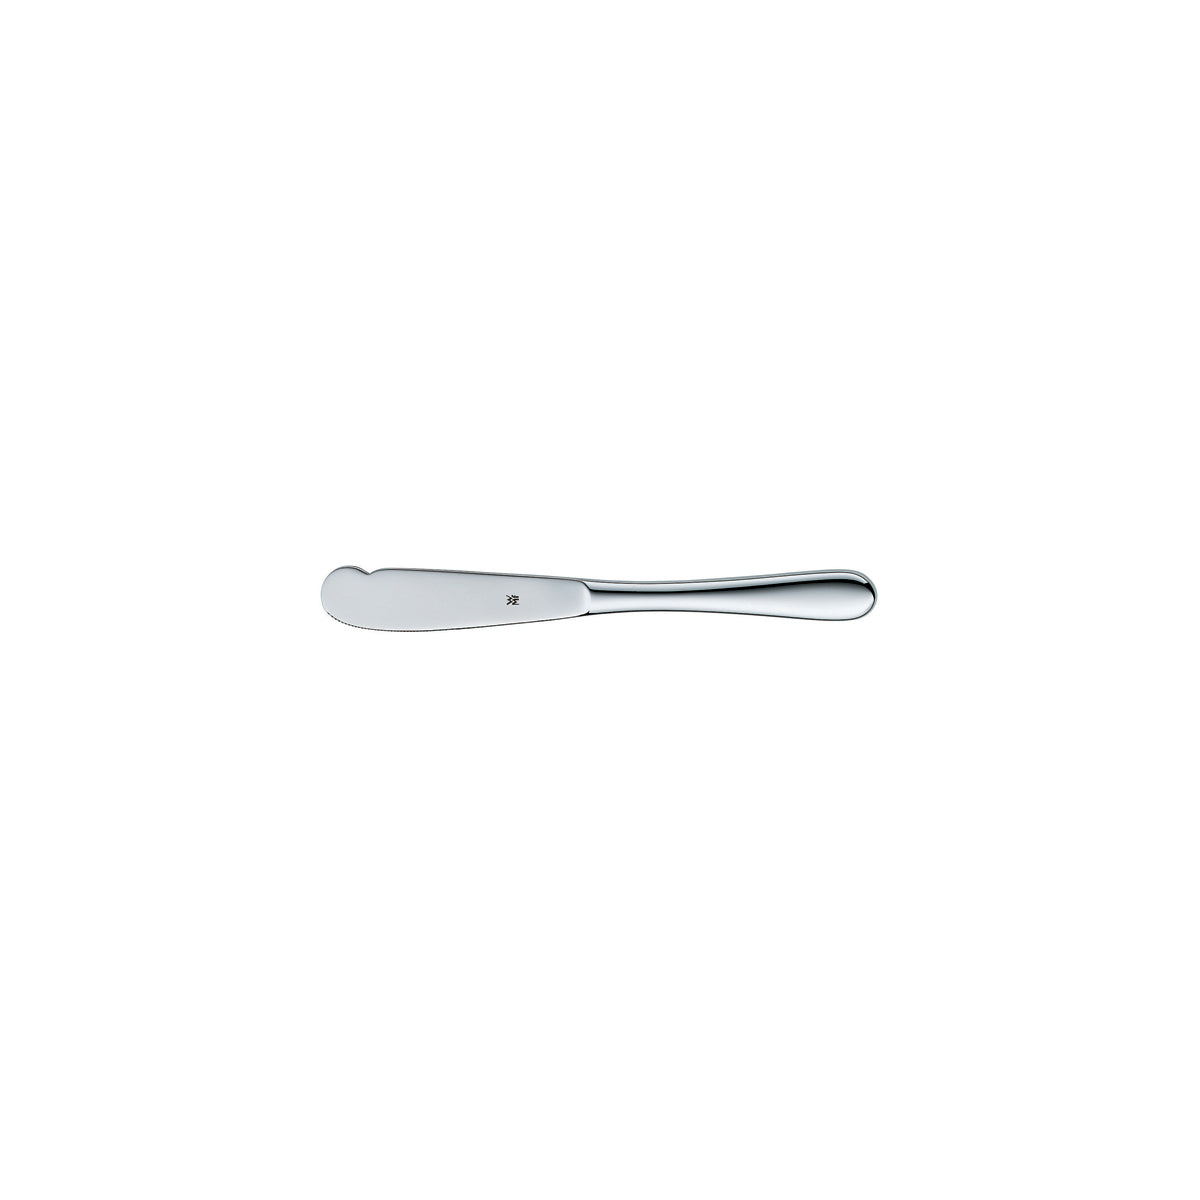 12.1966.6049 WMF Signum Butter Knife Stainless Steel Tomkin Australia Hospitality Supplies